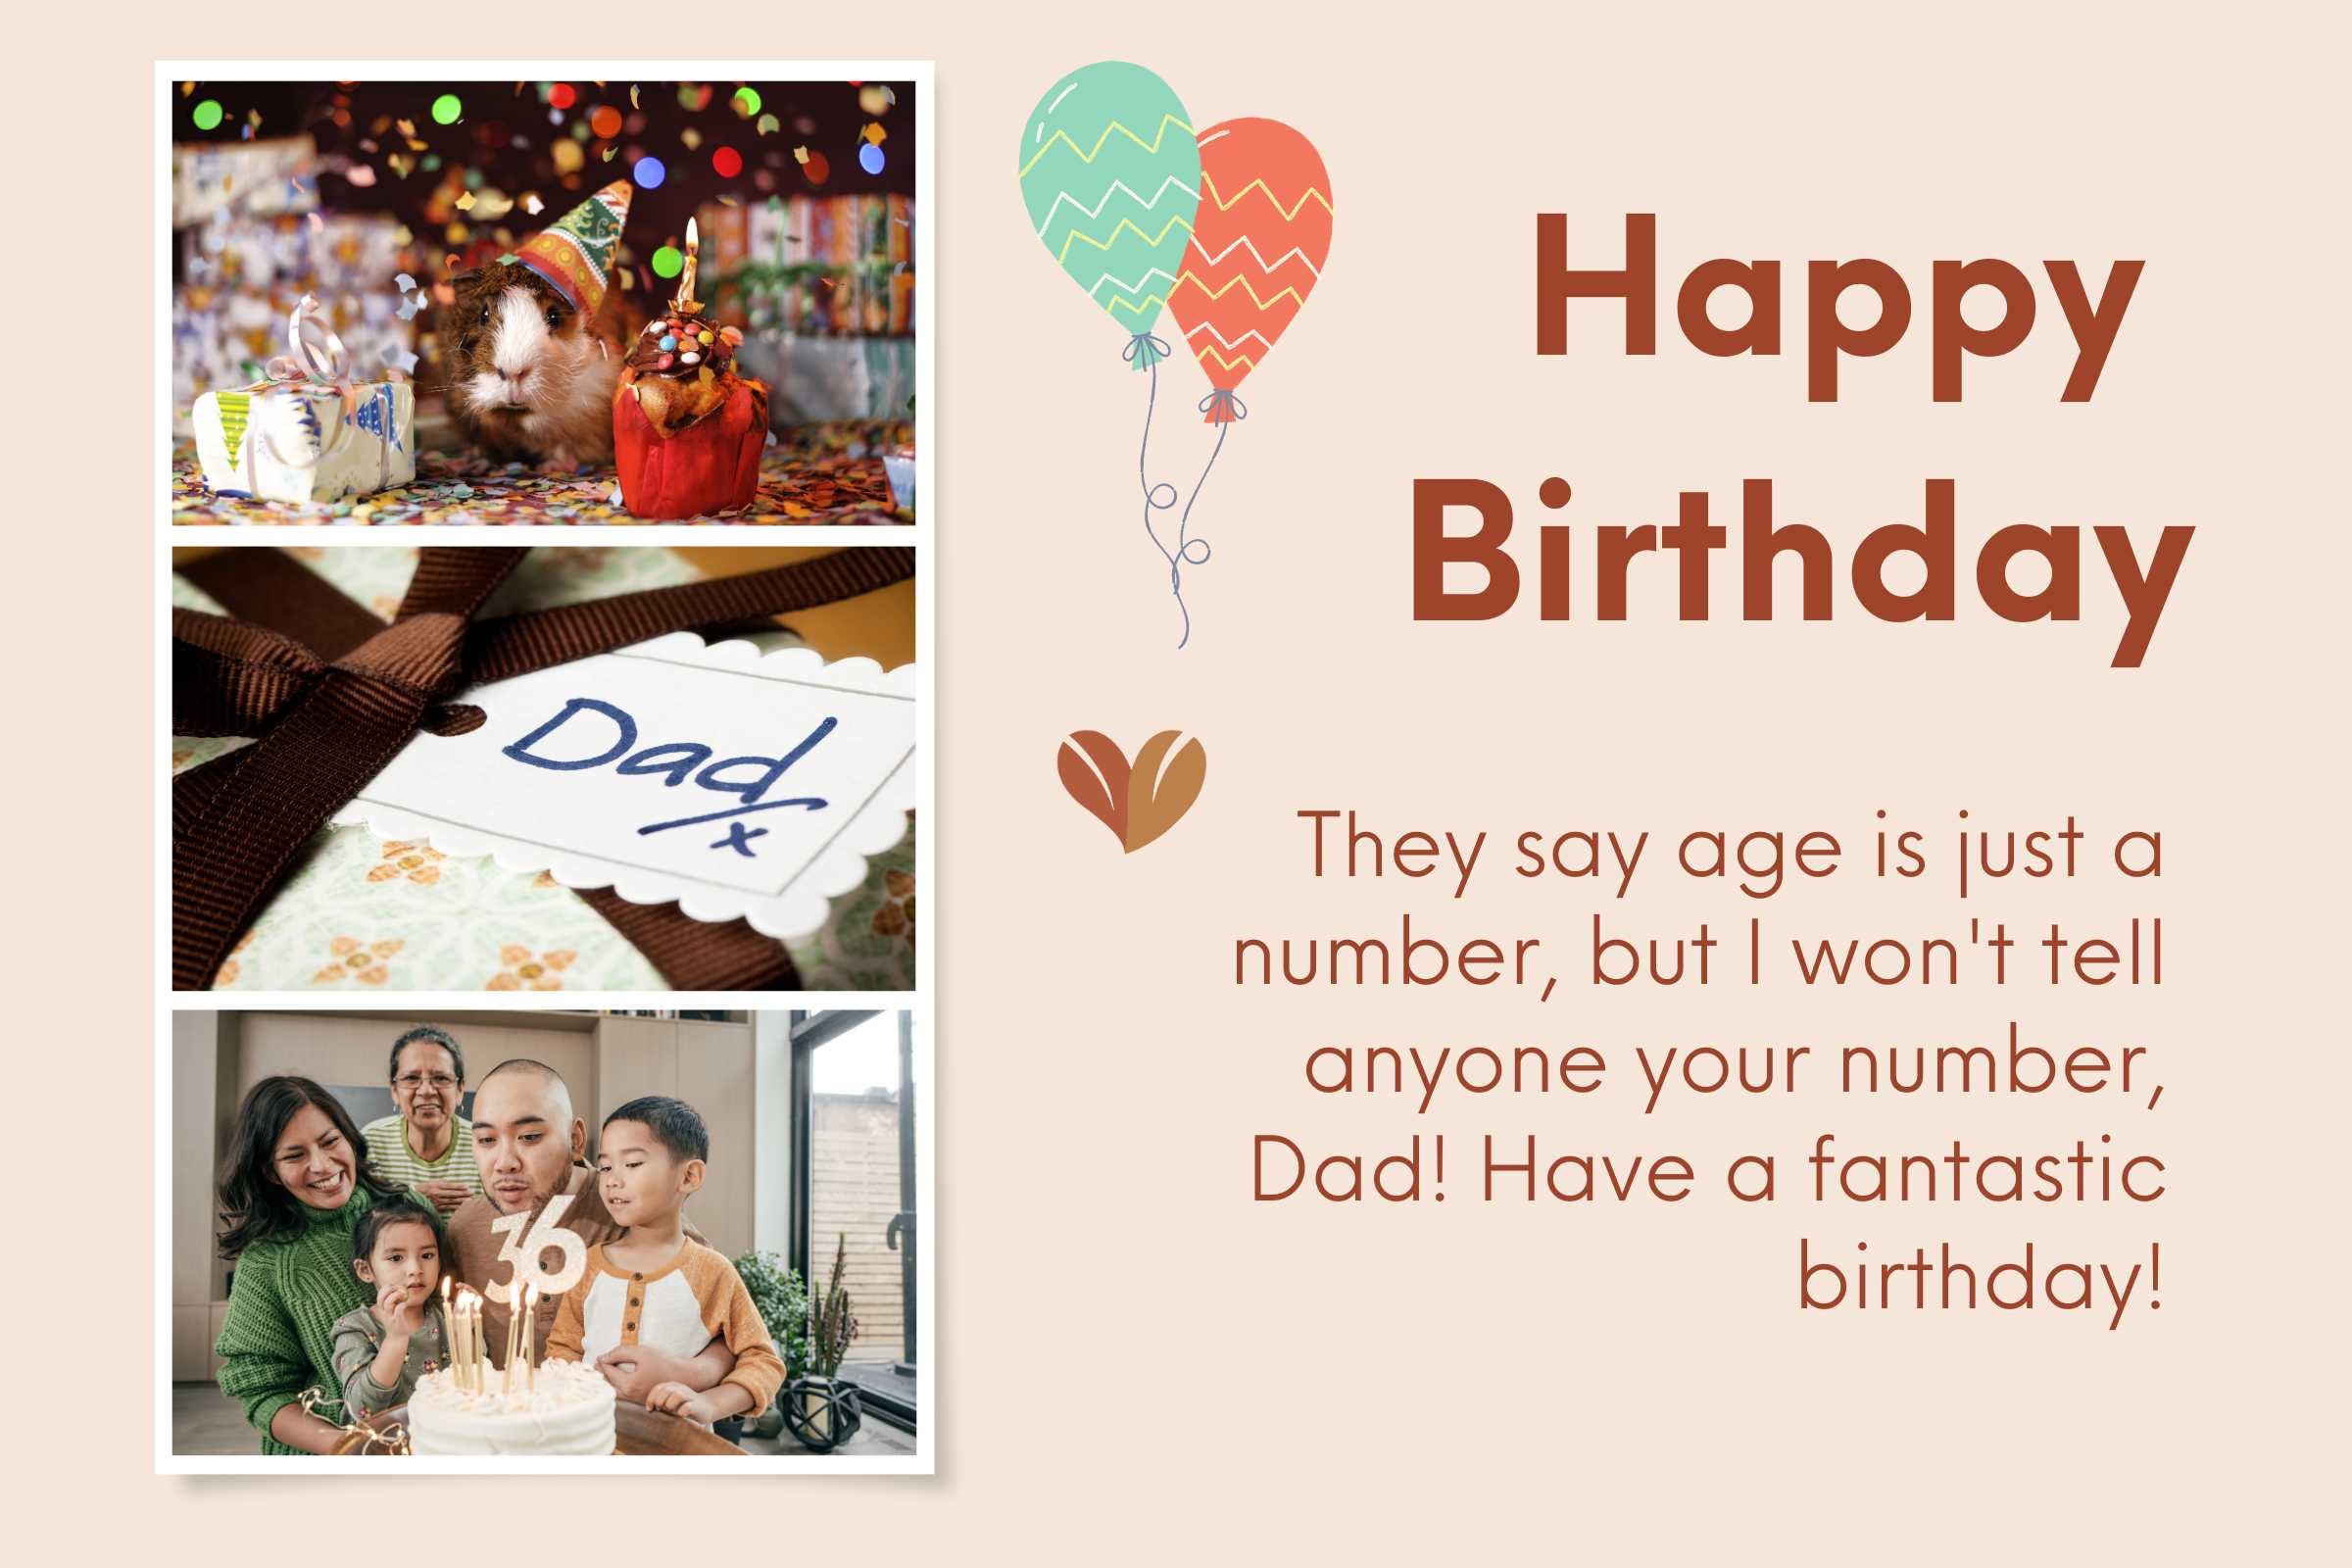 Dad, you're not old; you're vintage: The best birthday wishes for dad